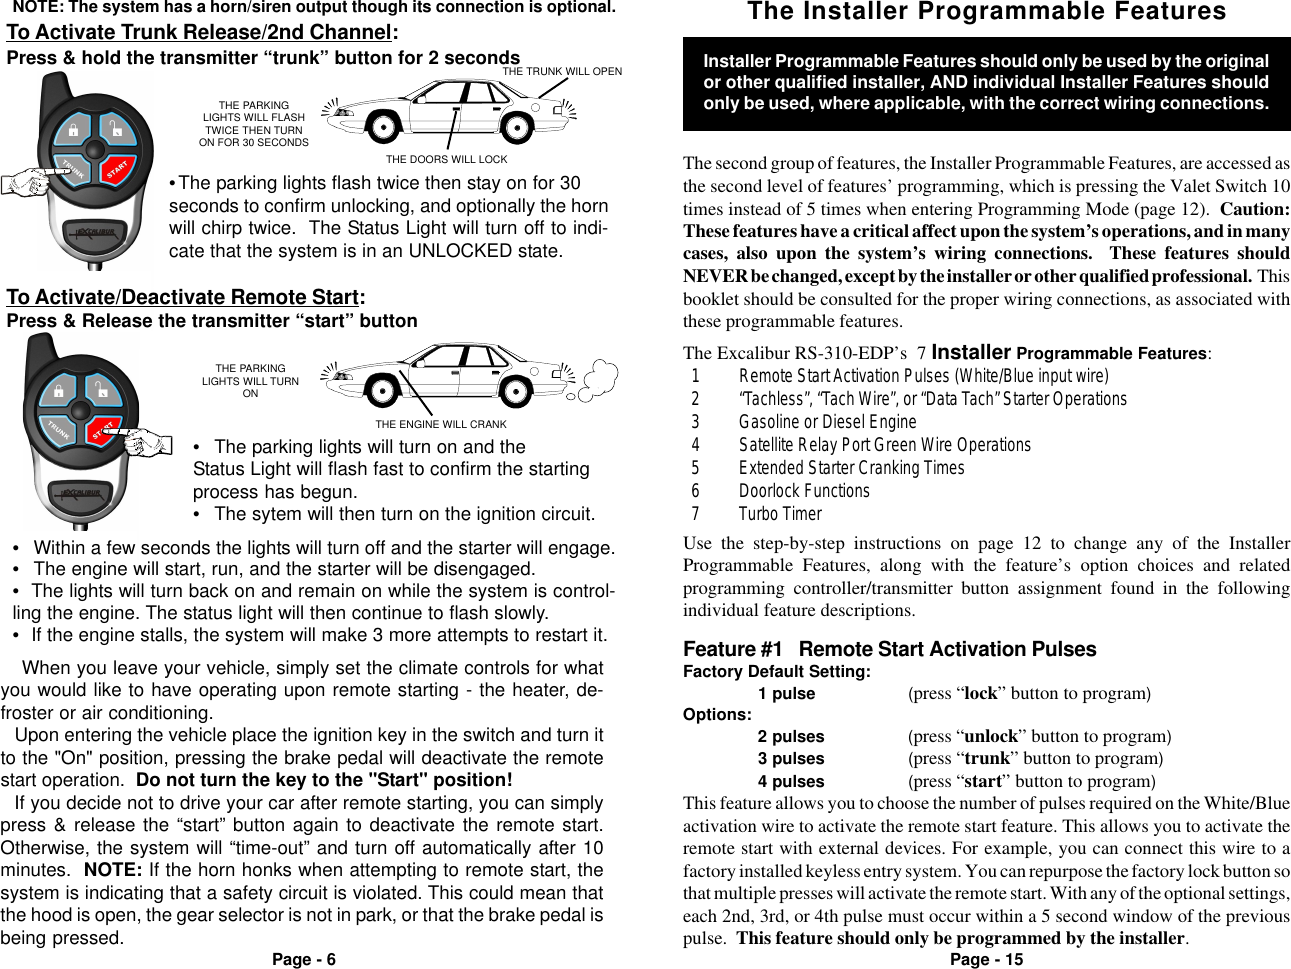 Page - 6 Page - 15NOTE: The system has a horn/siren output though its connection is optional.THE PARKINGLIGHTS WILL FLASHTWICE THEN TURNON FOR 30 SECONDSTHE DOORS WILL LOCKTHE PARKINGLIGHTS WILL TURNONTHE ENGINE WILL CRANKTo Activate Trunk Release/2nd Channel:Press &amp; hold the transmitter “trunk” button for 2 secondsTo Activate/Deactivate Remote Start:Press &amp; Release the transmitter “start” button•The parking lights flash twice then stay on for 30seconds to confirm unlocking, and optionally the hornwill chirp twice.  The Status Light will turn off to indi-cate that the system is in an UNLOCKED state.THE TRUNK WILL OPEN•Within a few seconds the lights will turn off and the starter will engage.•The engine will start, run, and the starter will be disengaged.•The lights will turn back on and remain on while the system is control-ling the engine. The status light will then continue to flash slowly.•If the engine stalls, the system will make 3 more attempts to restart it.•The parking lights will turn on and theStatus Light will flash fast to confirm the startingprocess has begun.•The sytem will then turn on the ignition circuit.Feature #1   Remote Start Activation PulsesFactory Default Setting:1 pulse (press “lock” button to program)Options:2 pulses (press “unlock” button to program)3 pulses (press “trunk” button to program)4 pulses (press “start” button to program)This feature allows you to choose the number of pulses required on the White/Blueactivation wire to activate the remote start feature. This allows you to activate theremote start with external devices. For example, you can connect this wire to afactory installed keyless entry system. You can repurpose the factory lock button sothat multiple presses will activate the remote start. With any of the optional settings,each 2nd, 3rd, or 4th pulse must occur within a 5 second window of the previouspulse.  This feature should only be programmed by the installer.The Installer Programmable FeaturesThe second group of features, the Installer Programmable Features, are accessed asthe second level of features’ programming, which is pressing the Valet Switch 10times instead of 5 times when entering Programming Mode (page 12).  Caution:These features have a critical affect upon the system’s operations, and in manycases, also upon the system’s wiring connections.  These features shouldNEVER be changed, except by the installer or other qualified professional.  Thisbooklet should be consulted for the proper wiring connections, as associated withthese programmable features.The Excalibur RS-310-EDP’s  7 Installer Programmable Features:  1 Remote Start Activation Pulses (White/Blue input wire)  2 “Tachless”, “Tach Wire”, or “Data Tach” Starter Operations  3 Gasoline or Diesel Engine  4 Satellite Relay Port Green Wire Operations  5 Extended Starter Cranking Times  6 Doorlock Functions  7 Turbo TimerUse the step-by-step instructions on page 12 to change any of the InstallerProgrammable Features, along with the feature’s option choices and relatedprogramming controller/transmitter button assignment found in the followingindividual feature descriptions.Installer Programmable Features should only be used by the originalor other qualified installer, AND individual Installer Features shouldonly be used, where applicable, with the correct wiring connections.When you leave your vehicle, simply set the climate controls for whatyou would like to have operating upon remote starting - the heater, de-froster or air conditioning.Upon entering the vehicle place the ignition key in the switch and turn itto the &quot;On&quot; position, pressing the brake pedal will deactivate the remotestart operation.  Do not turn the key to the &quot;Start&quot; position!If you decide not to drive your car after remote starting, you can simplypress &amp; release the “start” button again to deactivate the remote start.Otherwise, the system will “time-out” and turn off automatically after 10minutes.  NOTE: If the horn honks when attempting to remote start, thesystem is indicating that a safety circuit is violated. This could mean thatthe hood is open, the gear selector is not in park, or that the brake pedal isbeing pressed.